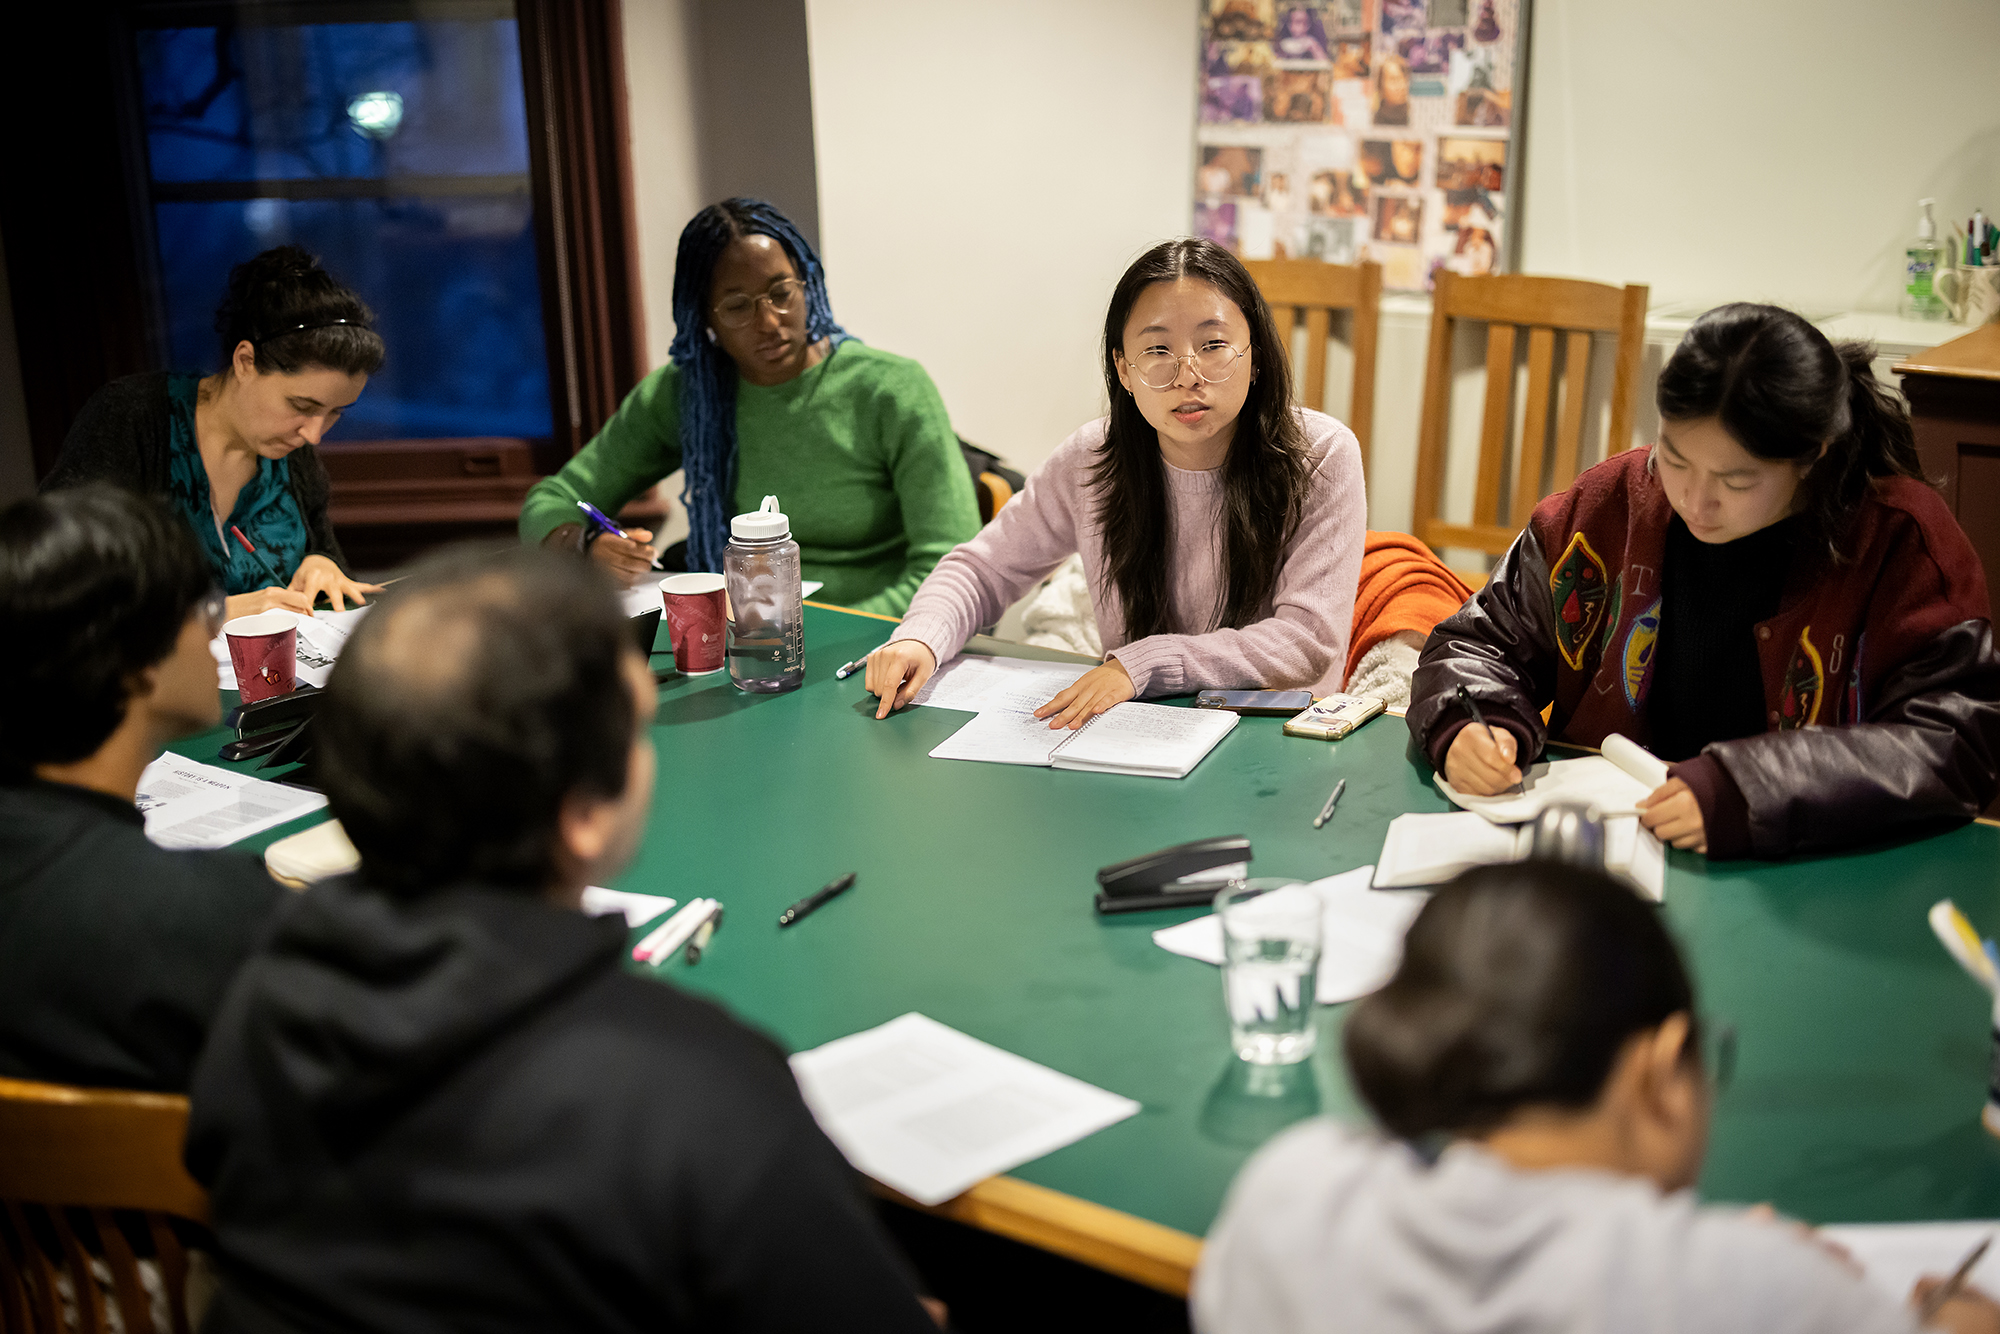 Nuri Yi, a Lotus member and second-year grad student in the Department of Biology in the School of Arts & Sciences, leads a discussion of Baldwin’s work at Kelly Writers House.